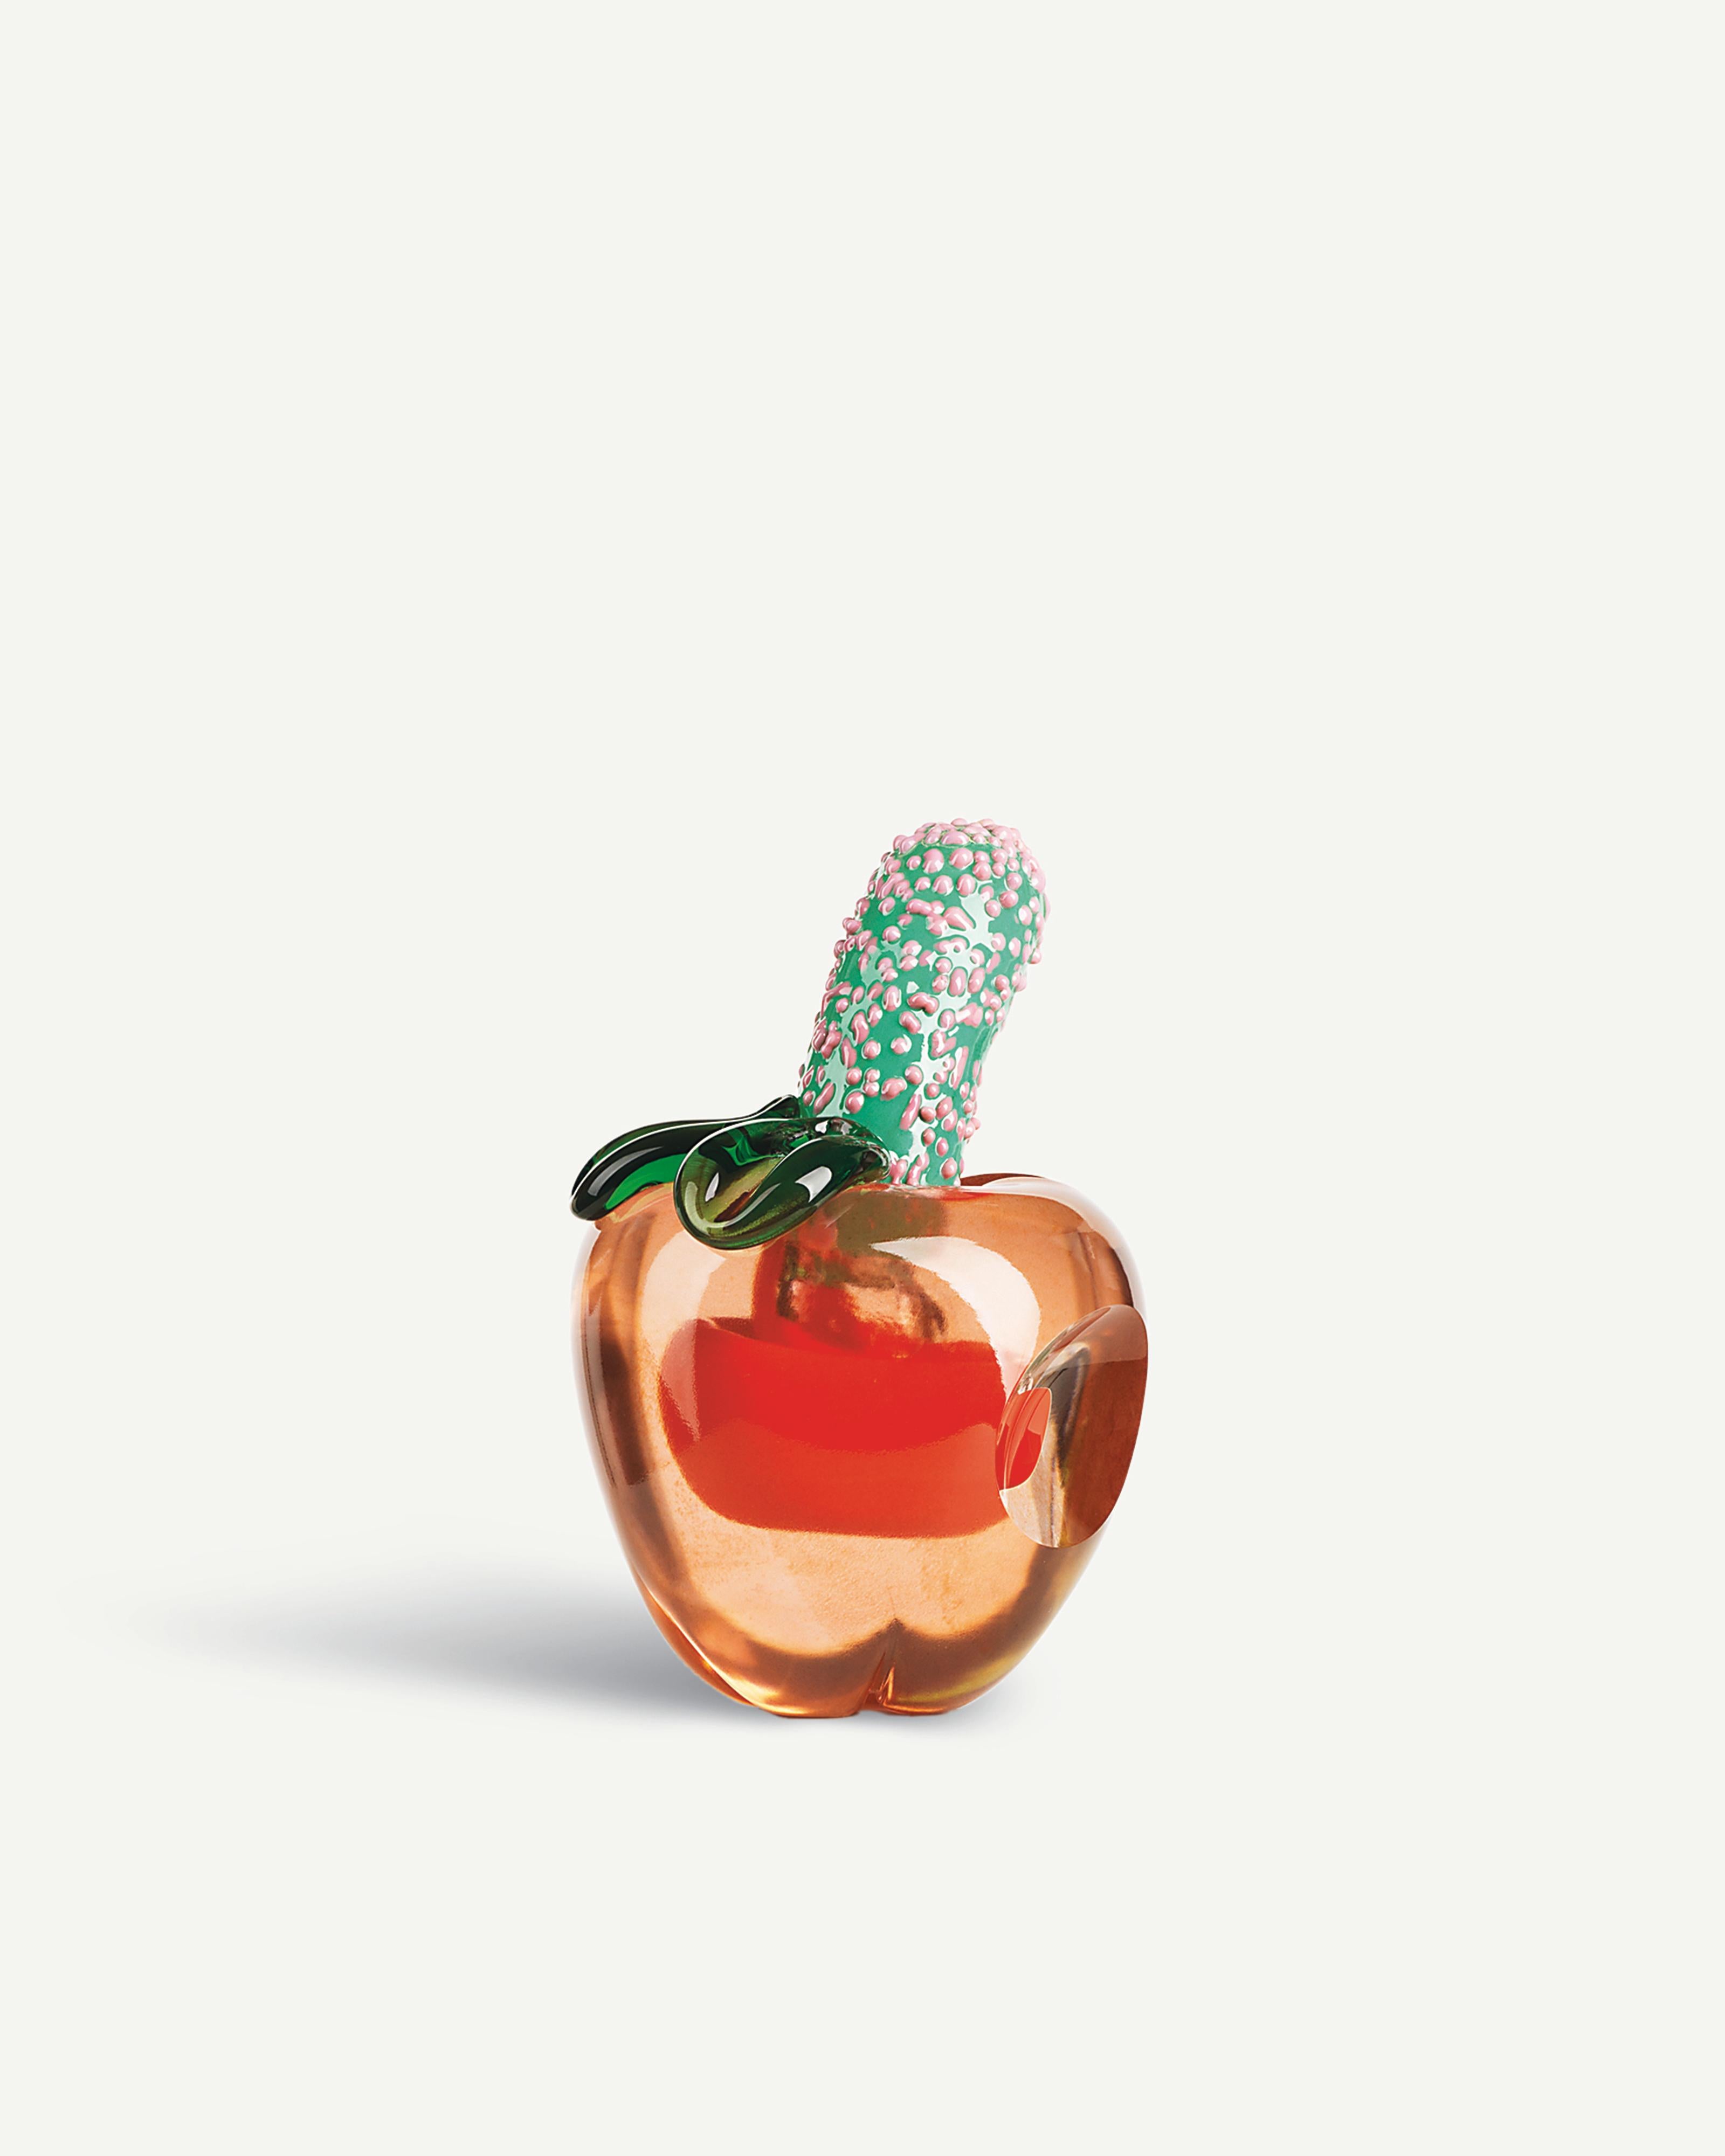 Åsa Jungnelius is an artist with a compelling feminist approach to everything she creates. Inspired by Ulrica Hydman Vallien, who often portrayed the female body in her art, Åsa created We Love Apples as an homage to the late artist. Sven X: et